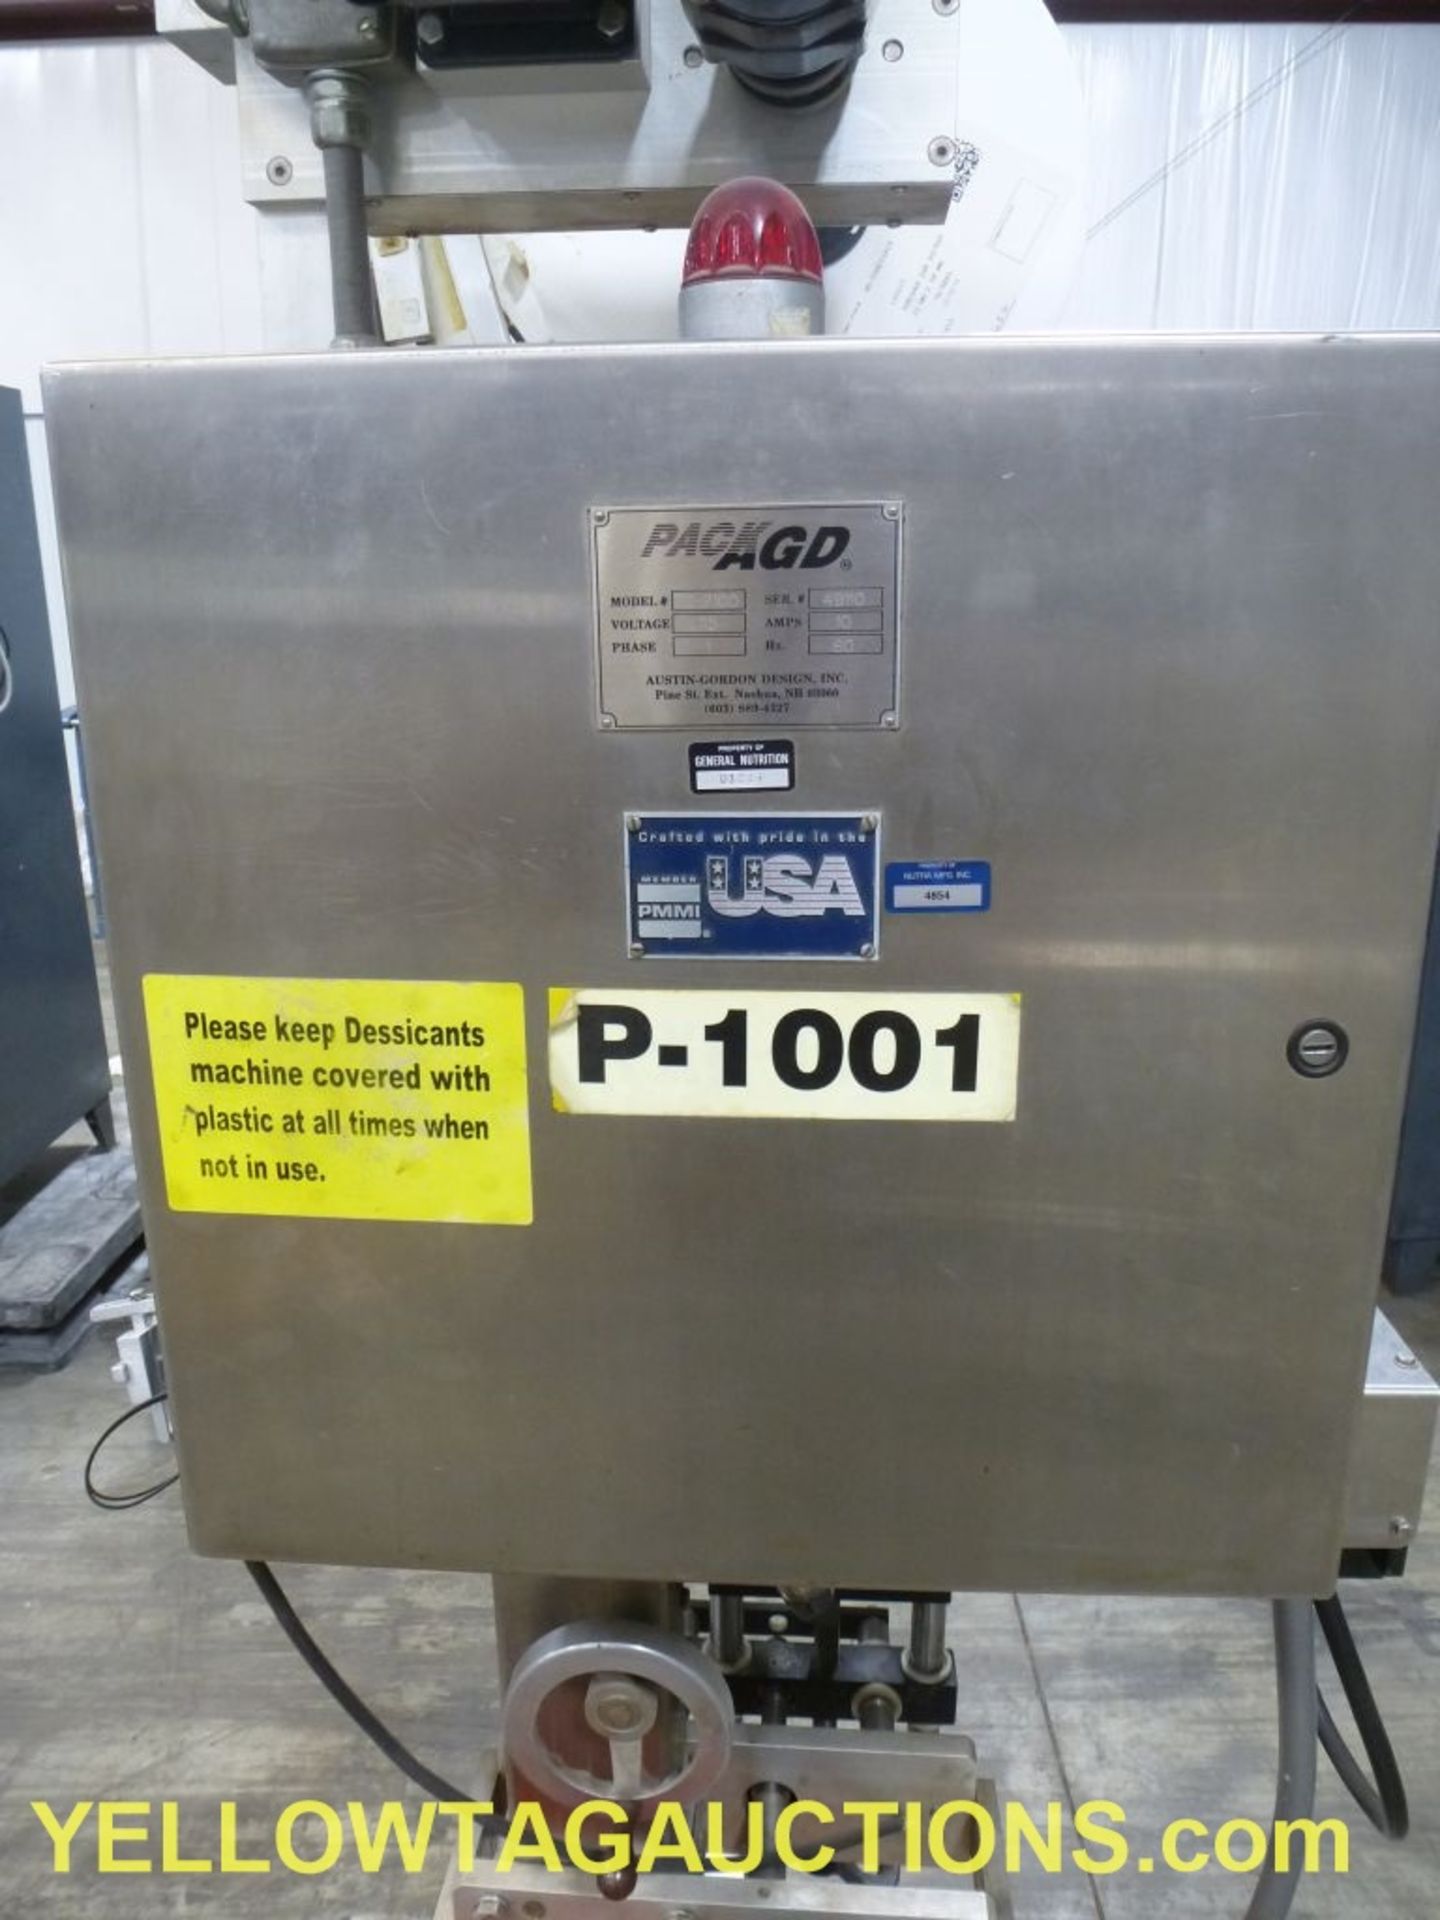 Pack AGD Auto Packaging System|Model No. PD2100; 115V; 10A; 1-Phase|Lot Loading Fee: $5.00 - Image 8 of 14